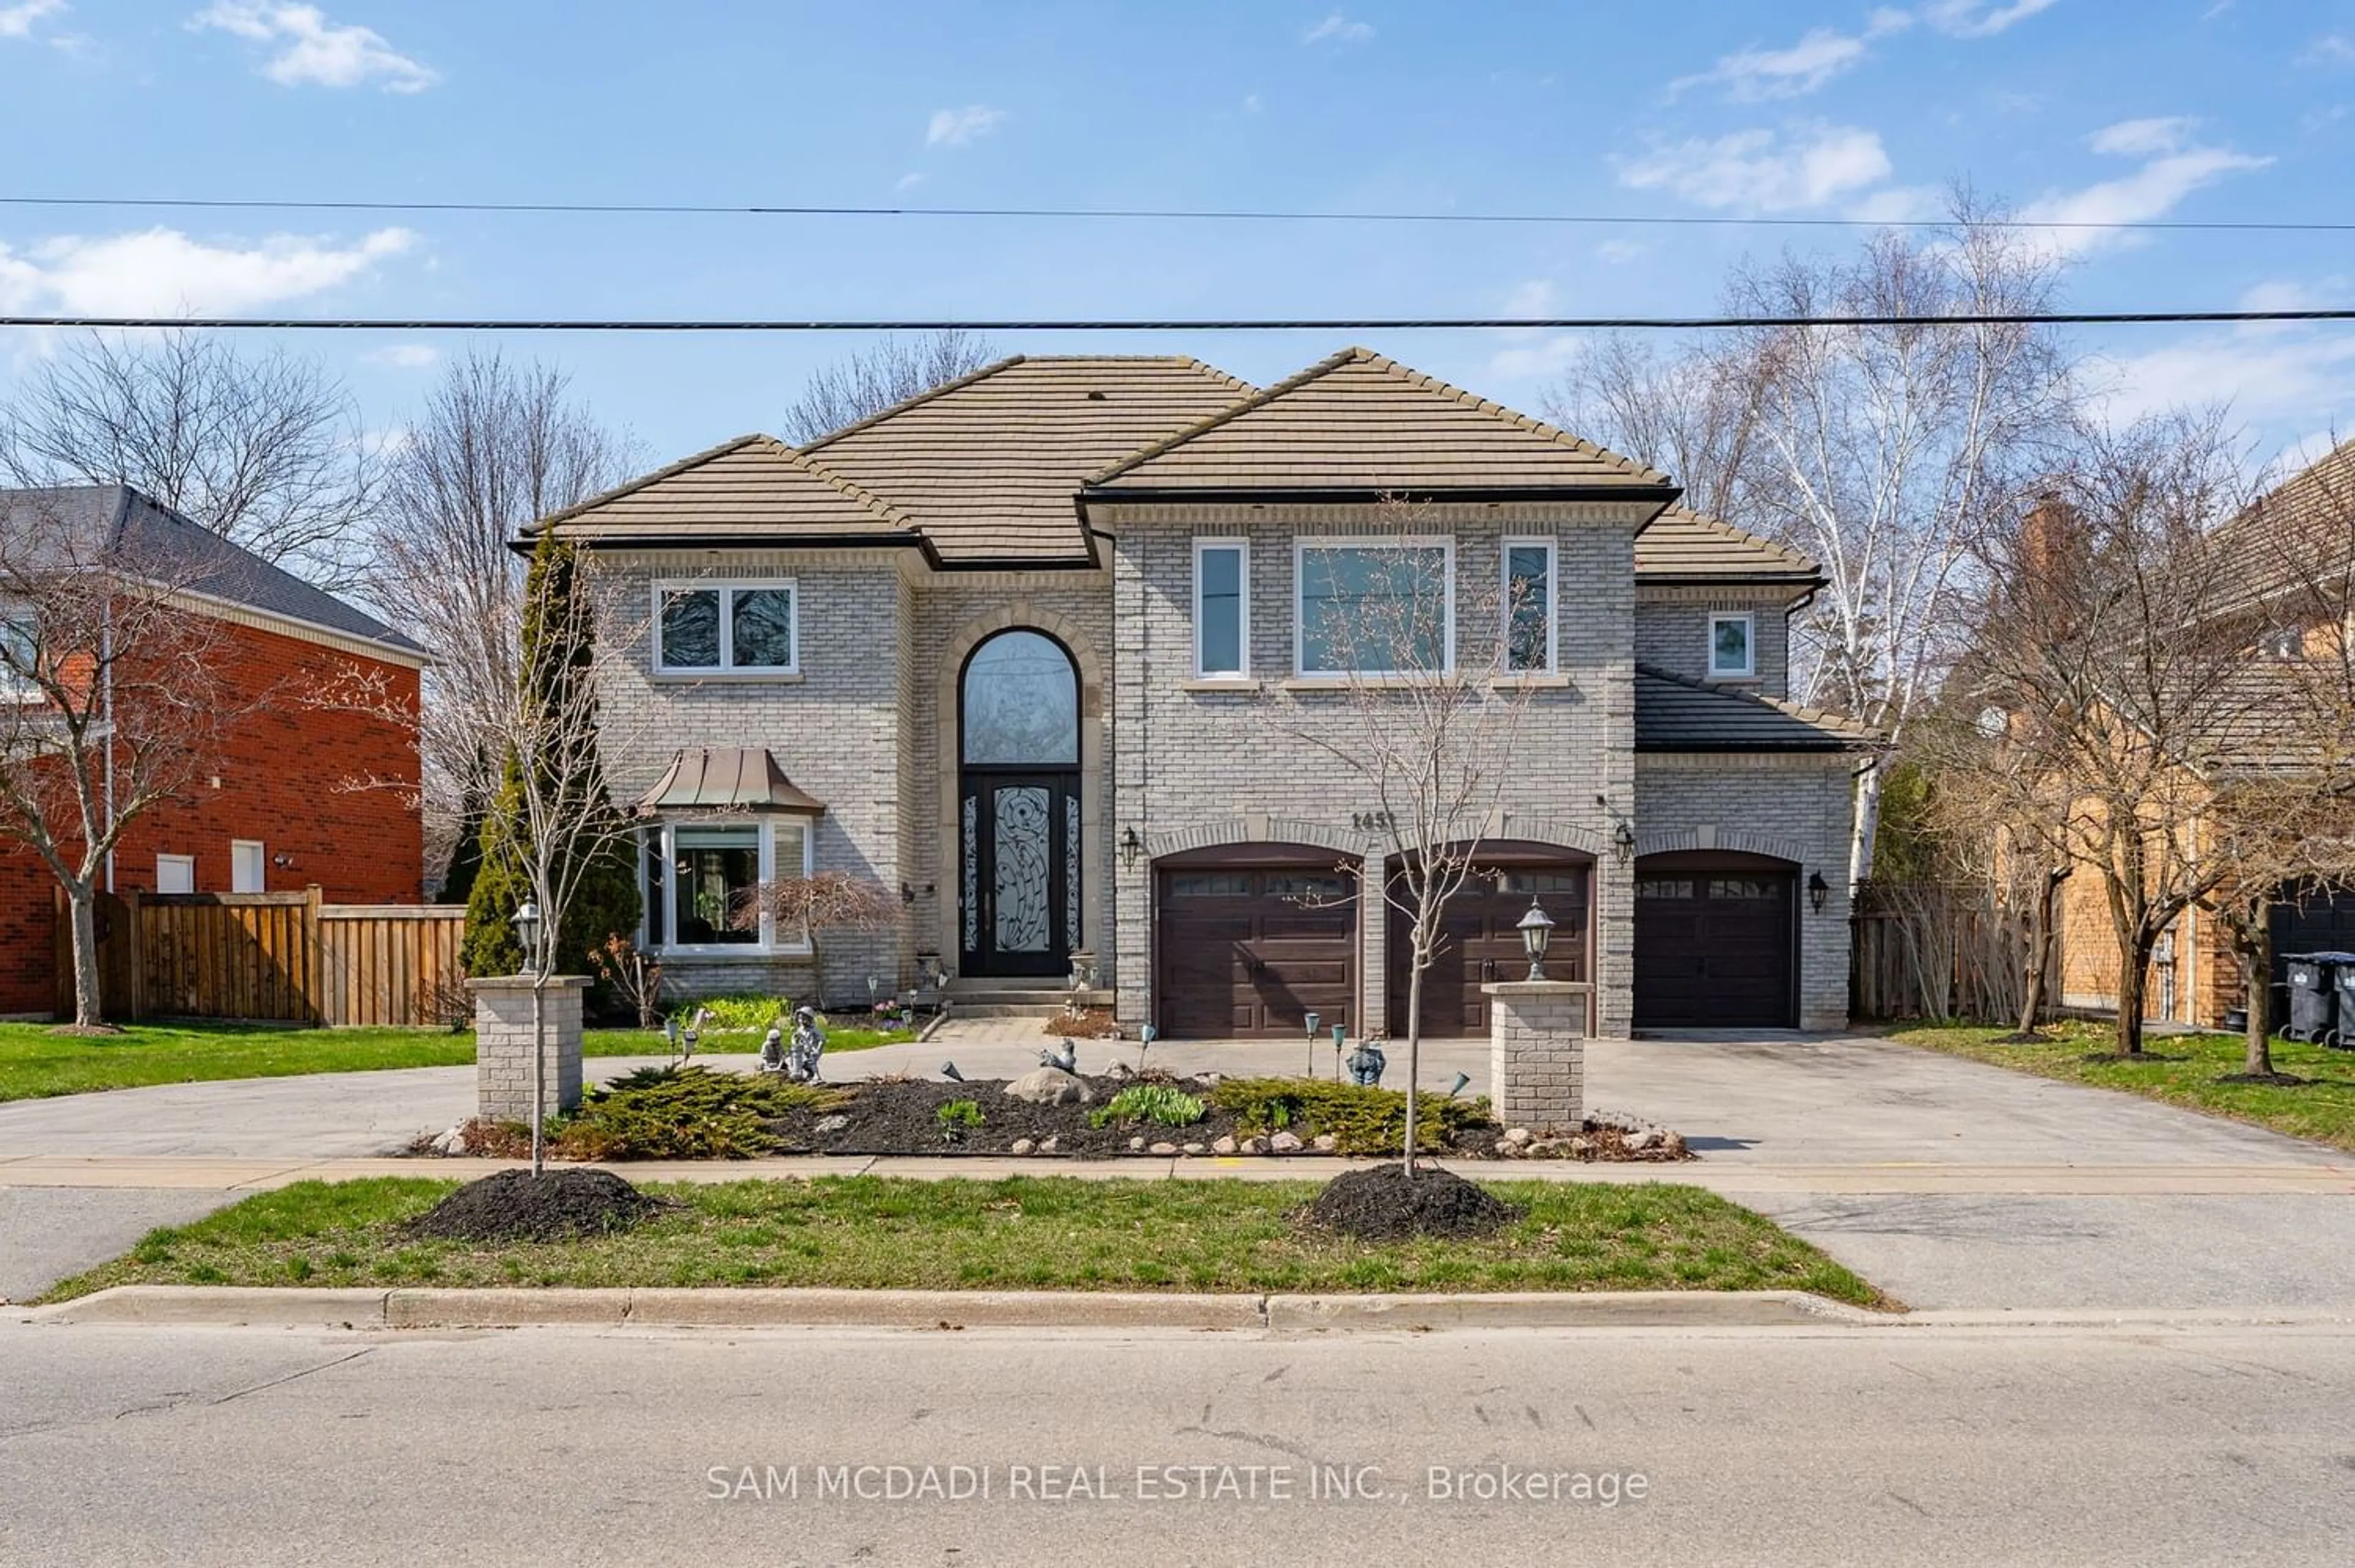 Frontside or backside of a home for 1451 Indian Rd, Mississauga Ontario L5H 1S5